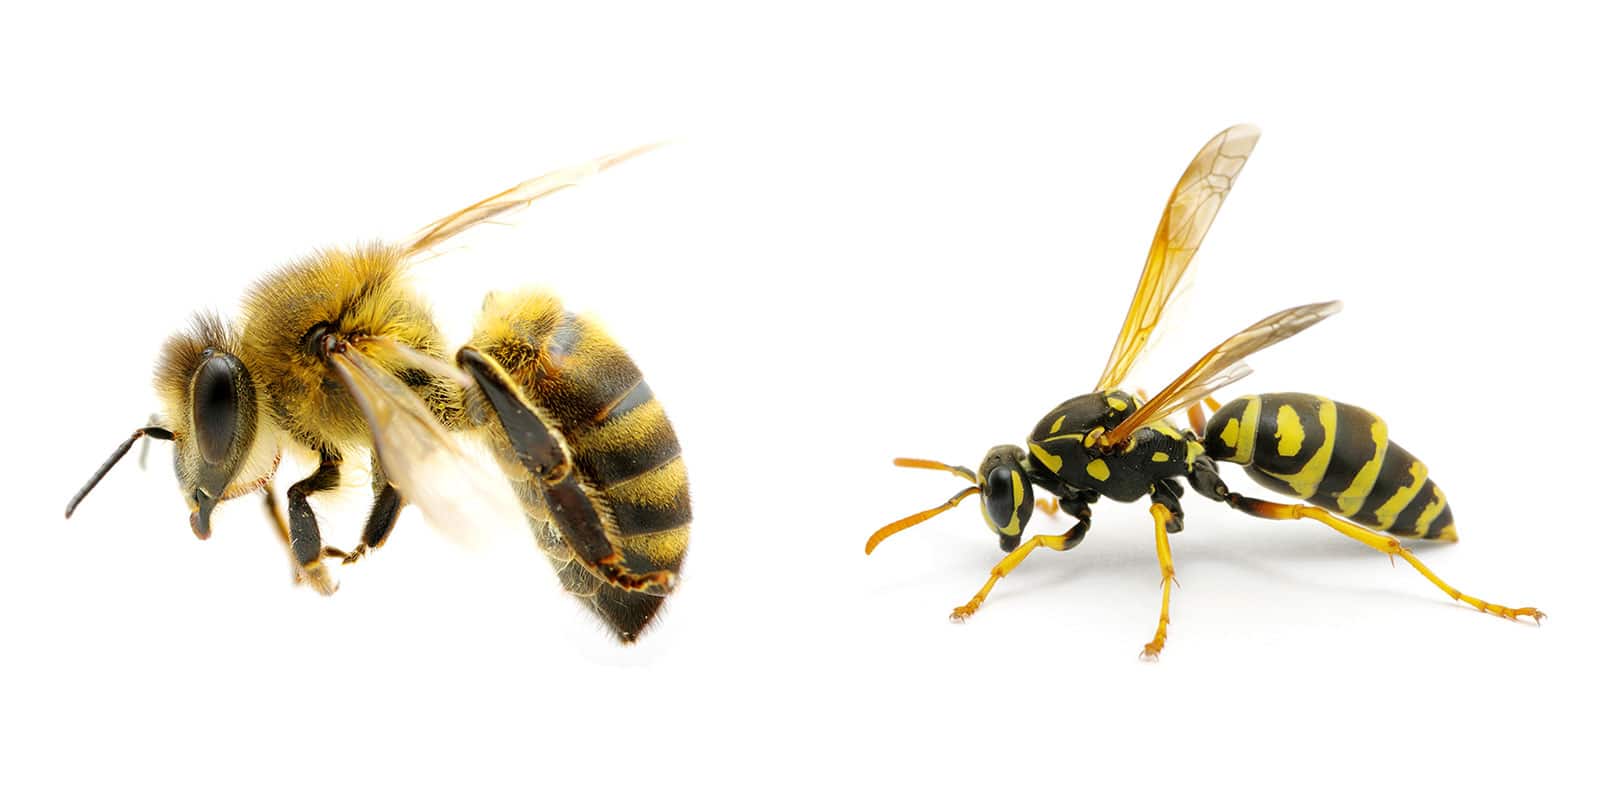 Visual comparison of a bee (on left) and a wasp (on right)